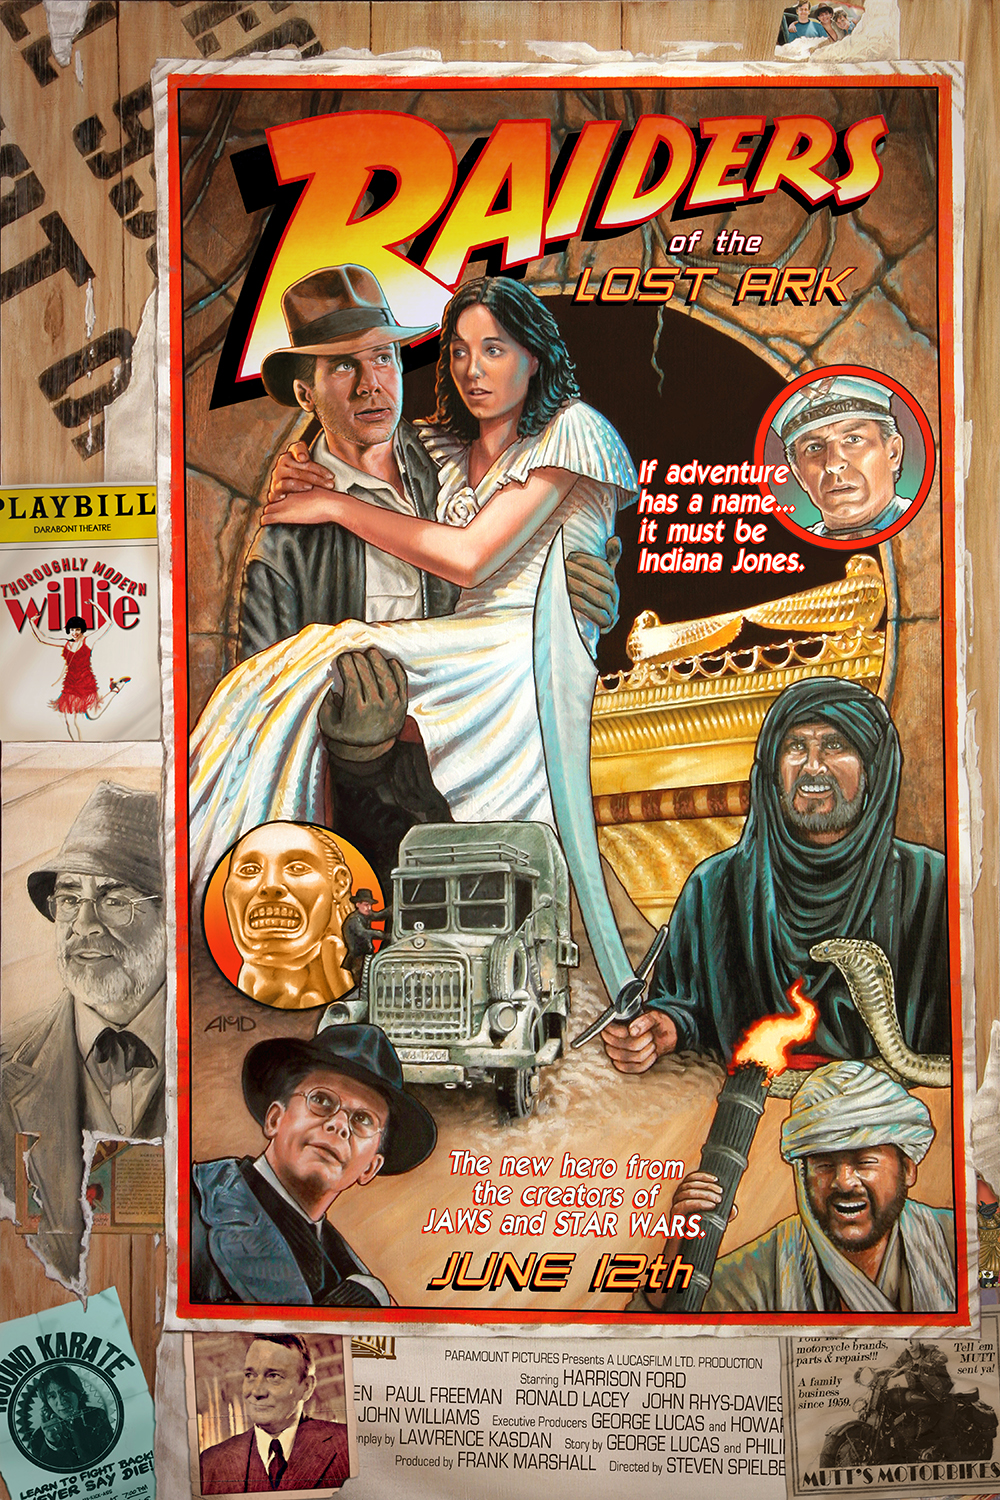 Raiders of the Lost Ark "Circus Style" poster - revised by cinemalad